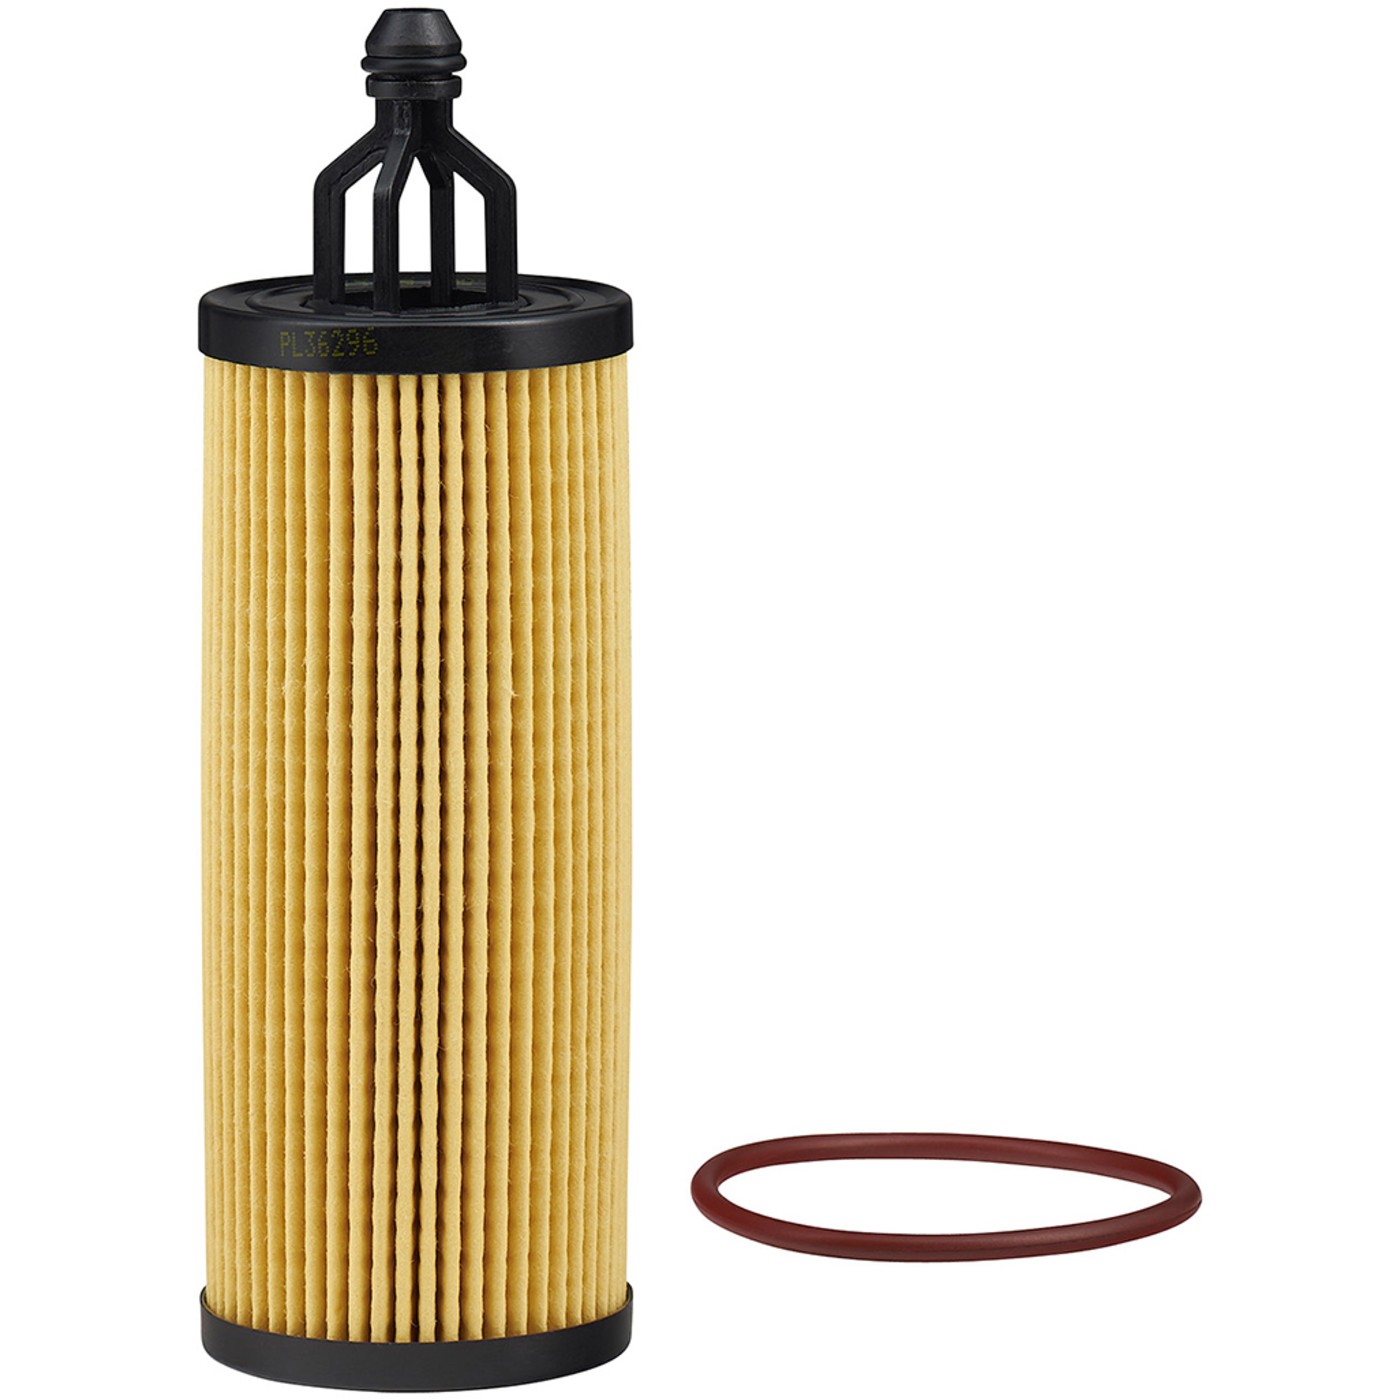 PL36296 Purolator New Oil Filter for VW Town and Country Jeep Grand ...